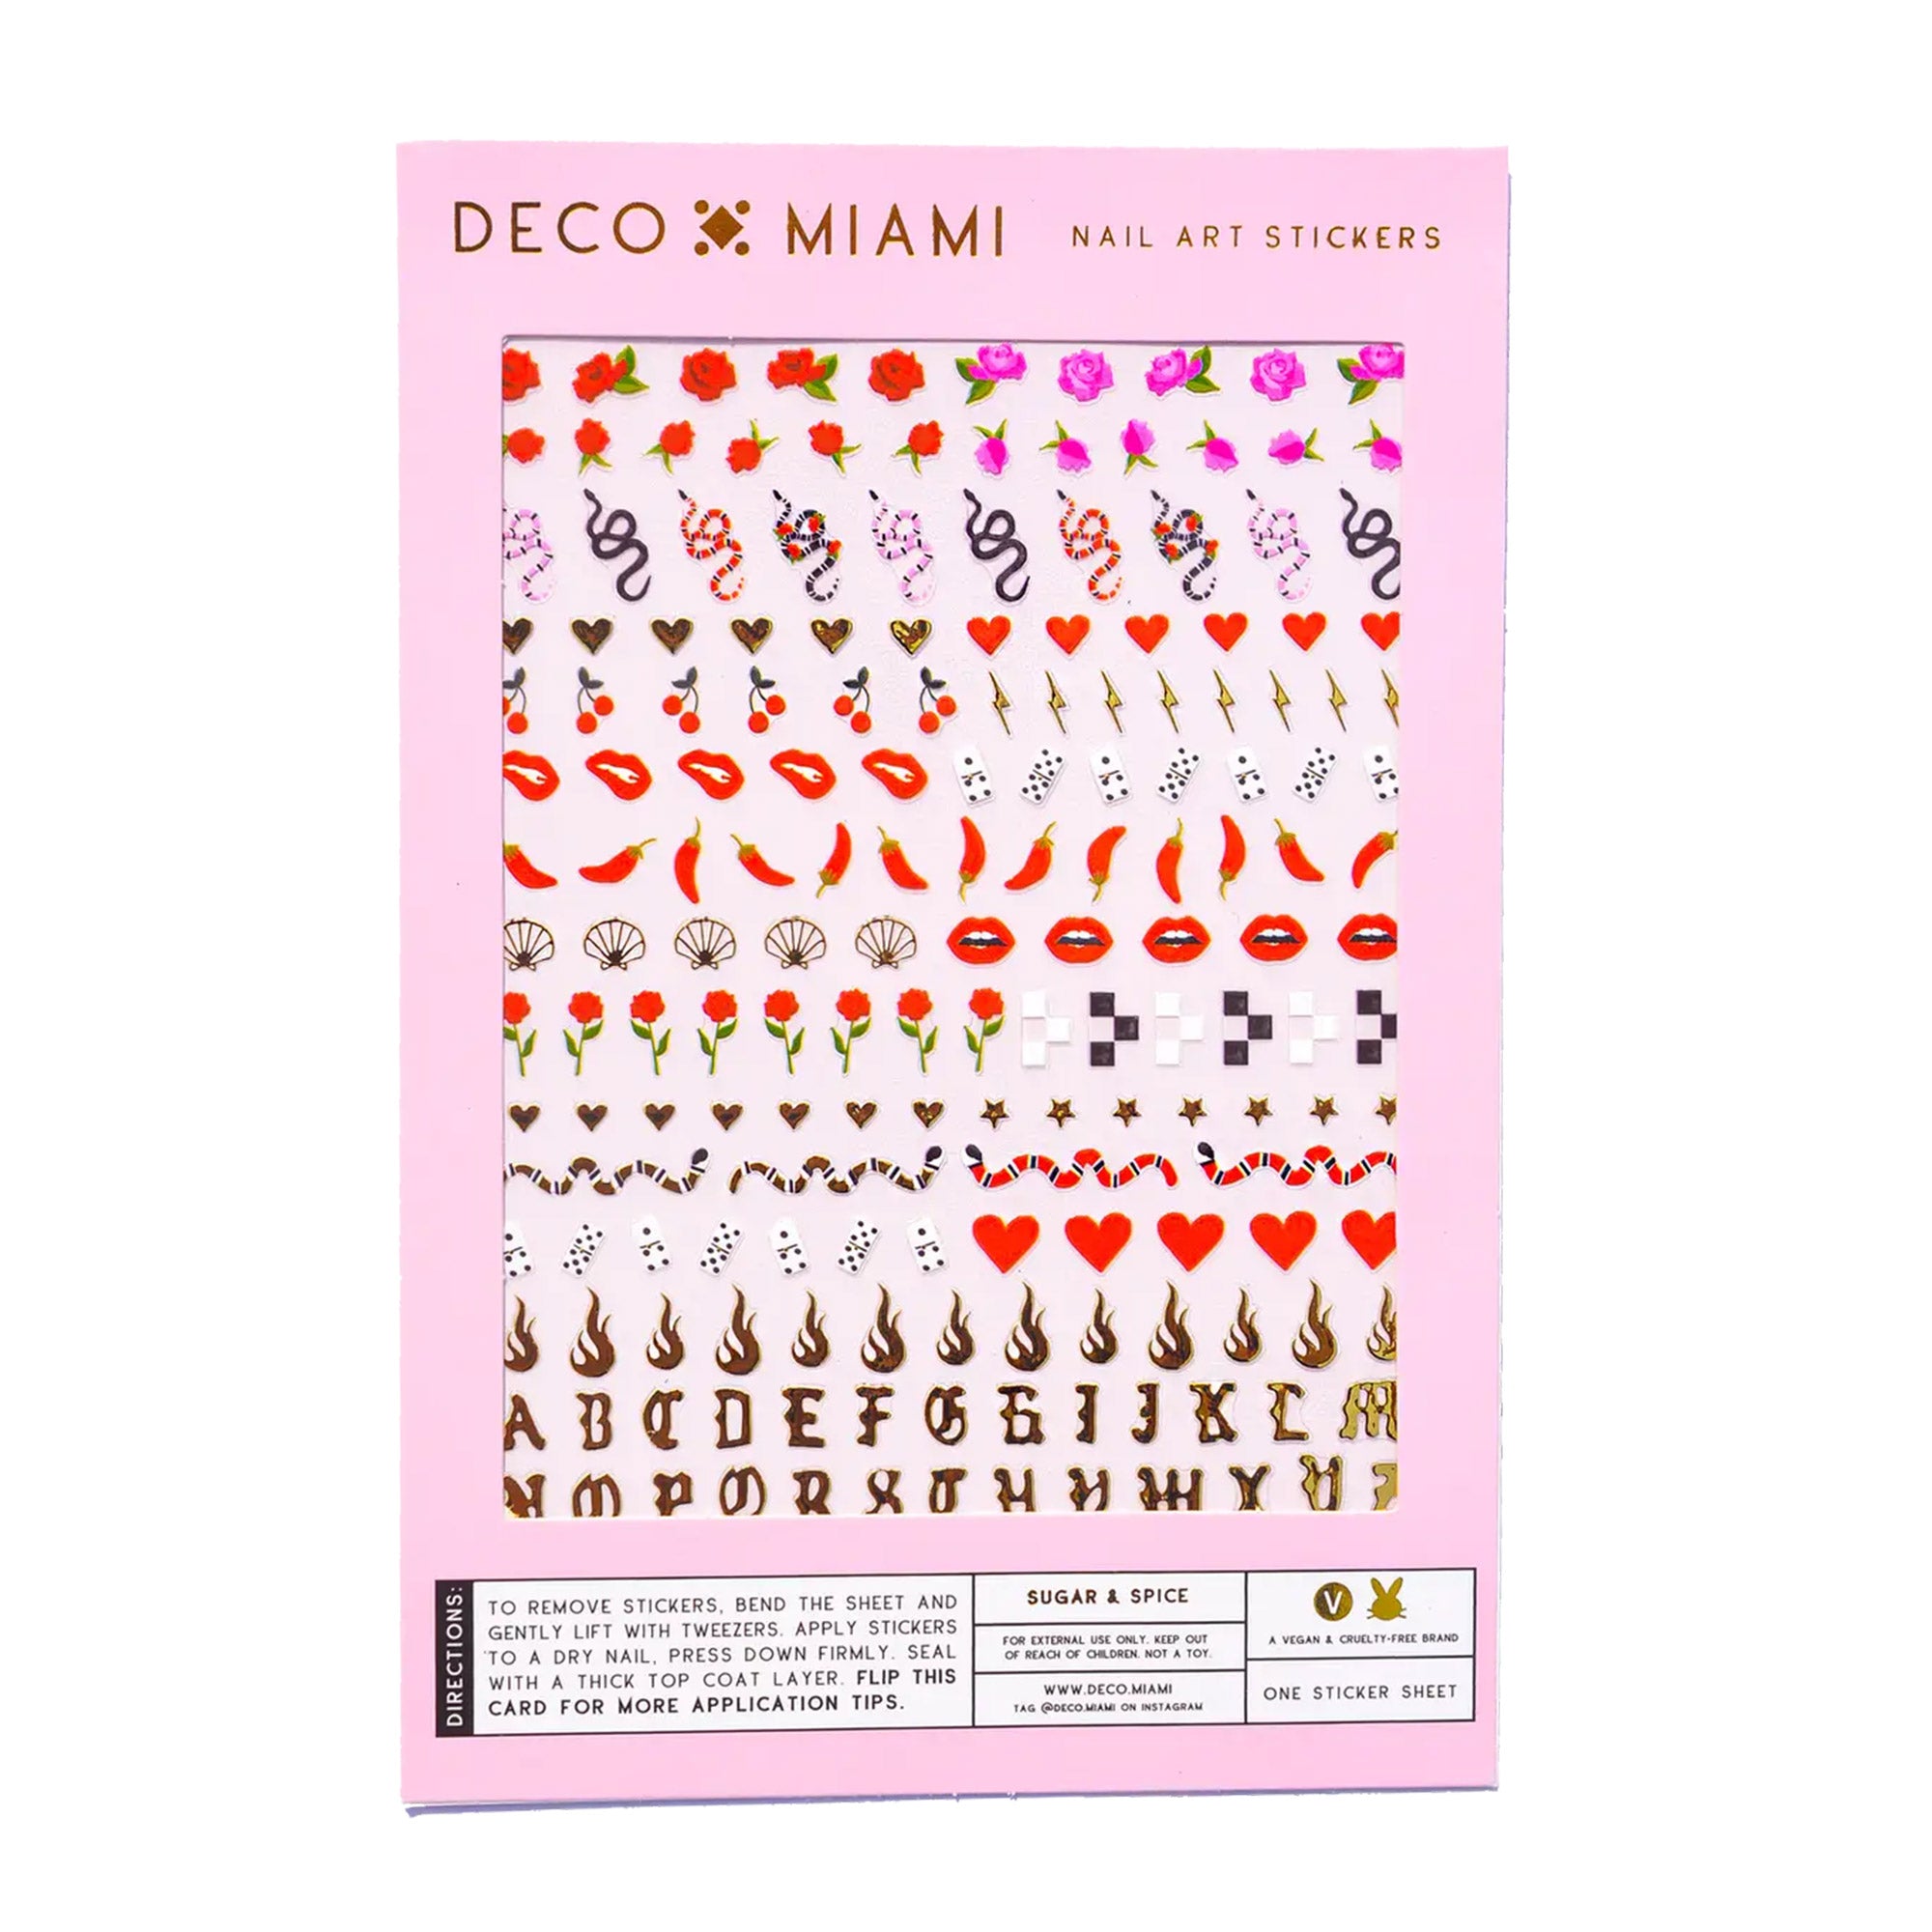 Deco Miami Nail Art Stickers / Sugar & Spice Roses, Red, Pink, Chili, Flames, Cherries, Gold, CHecker, Snakes, Heart, Valentine